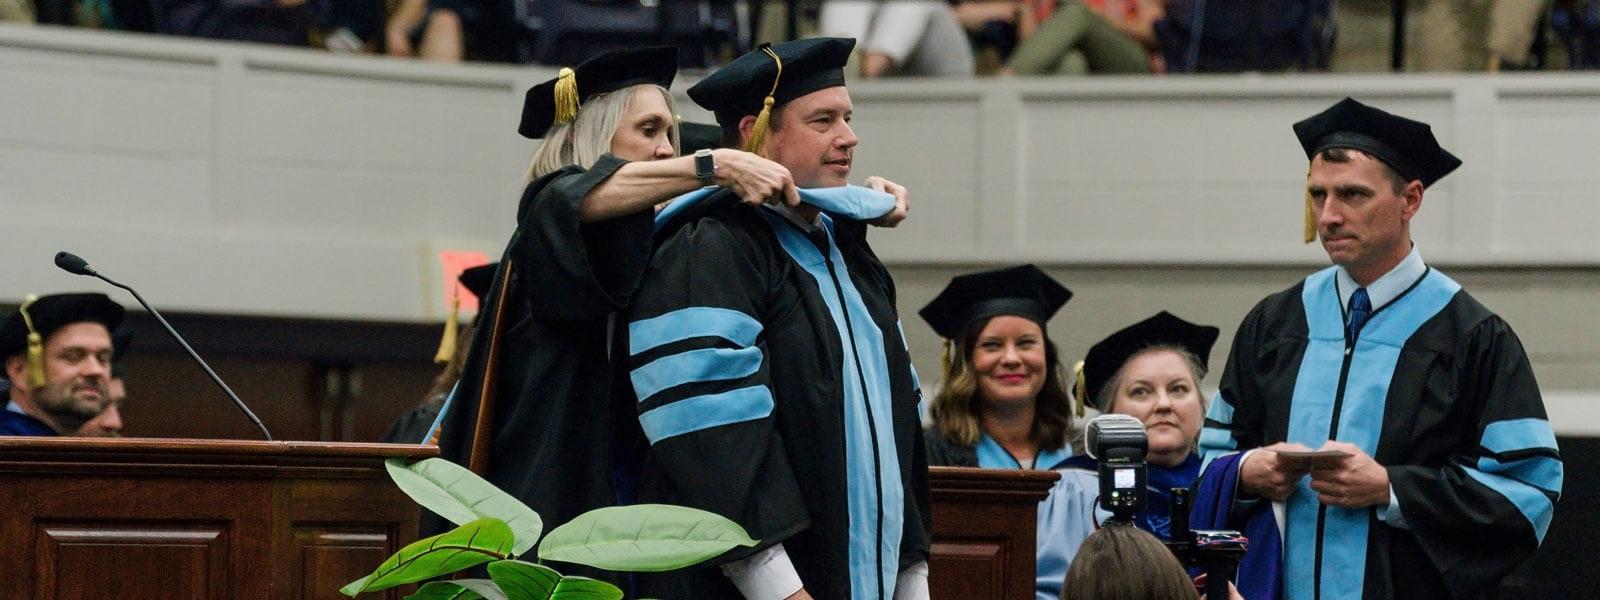 doctor of education graduate shakes president's hand as he receives diploma on graduation stage